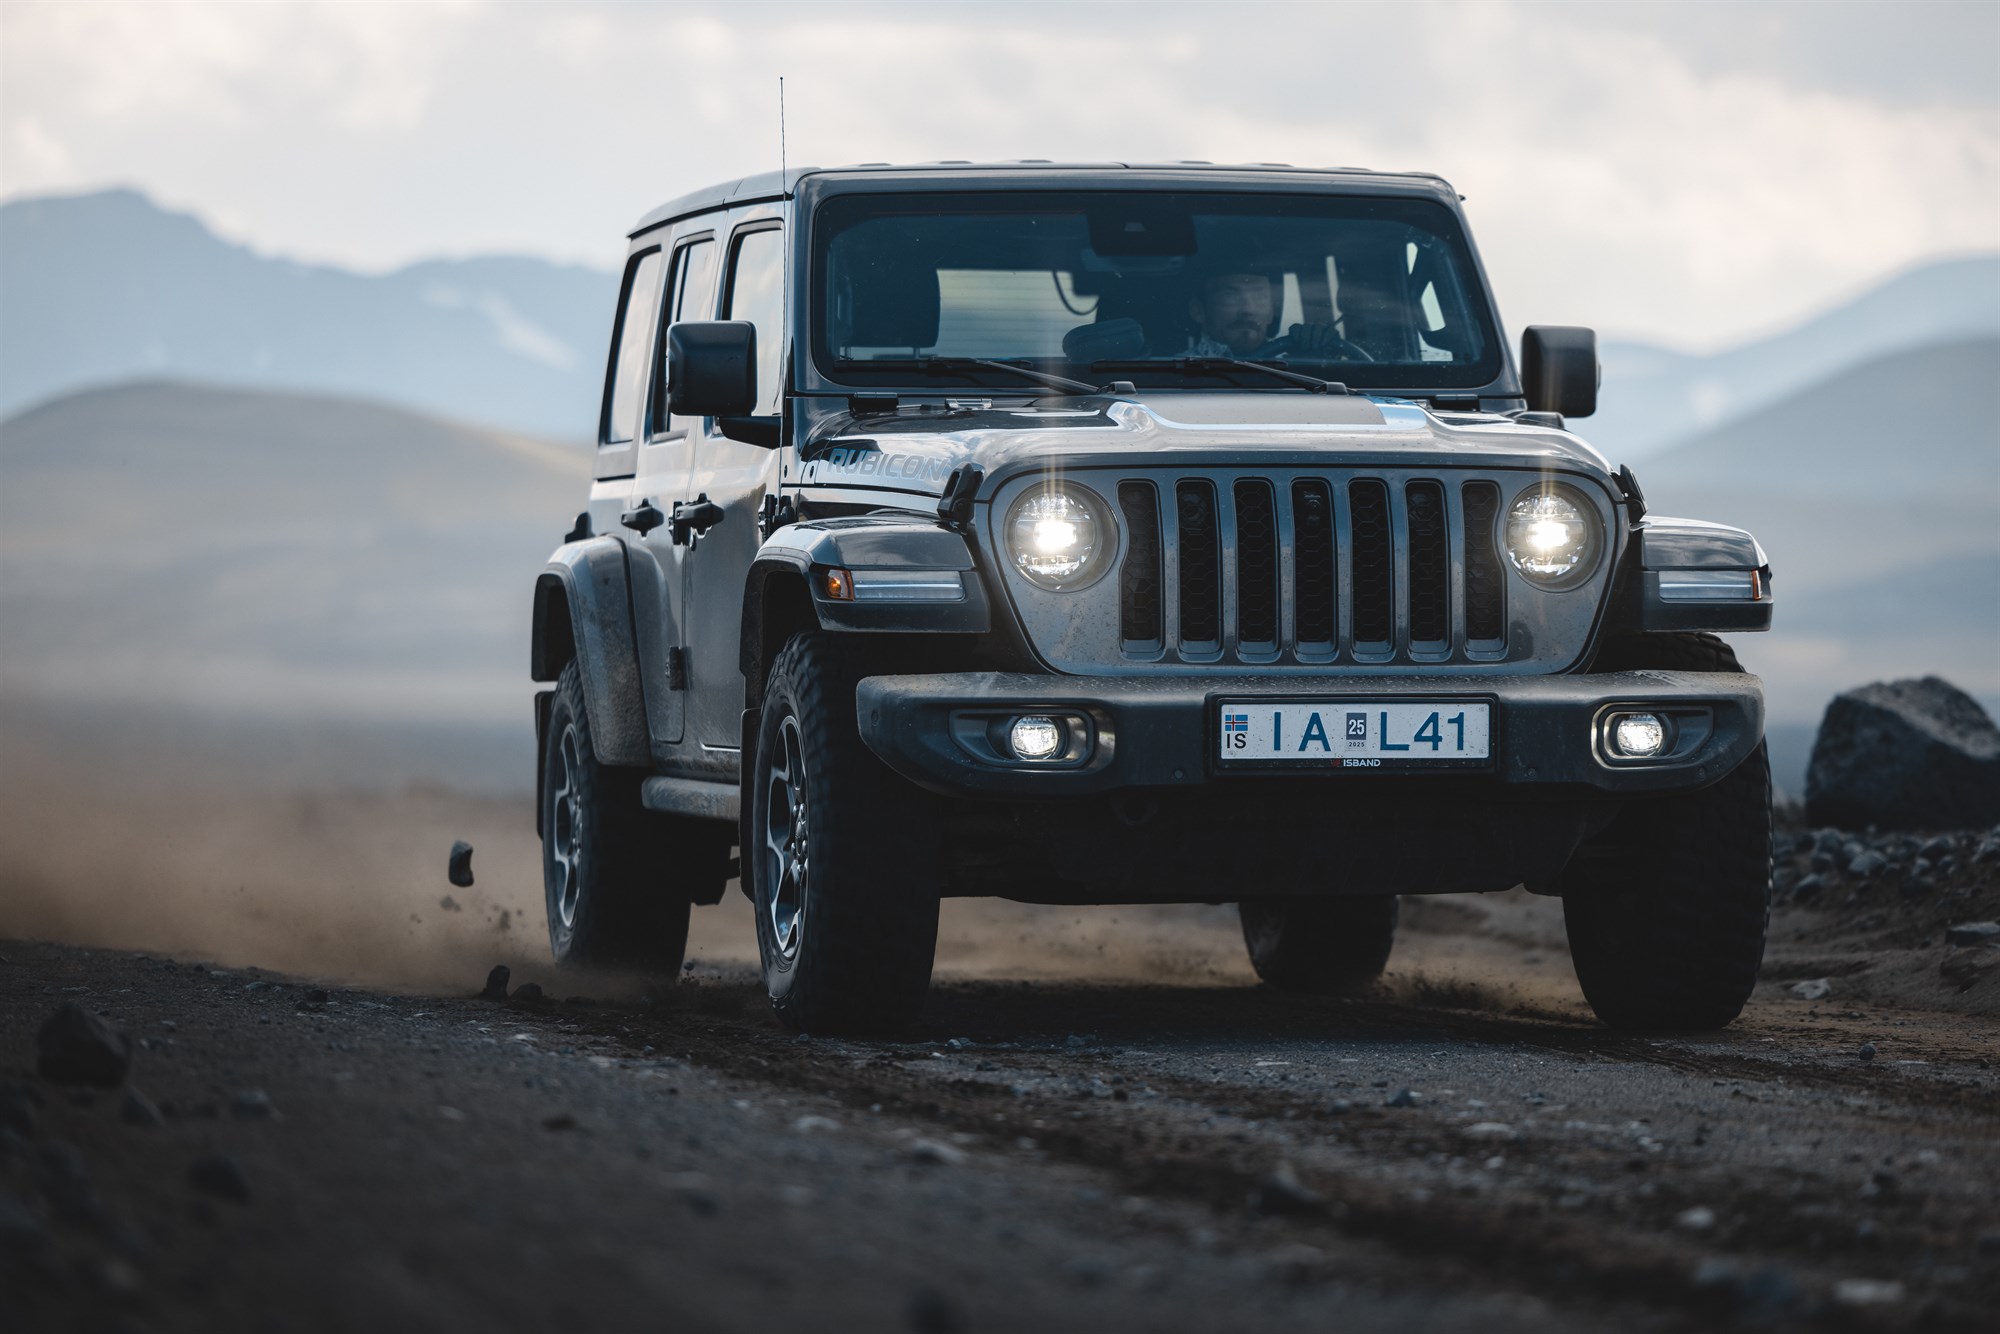 Wangler Rubicon driving on an F-road in Iceland.